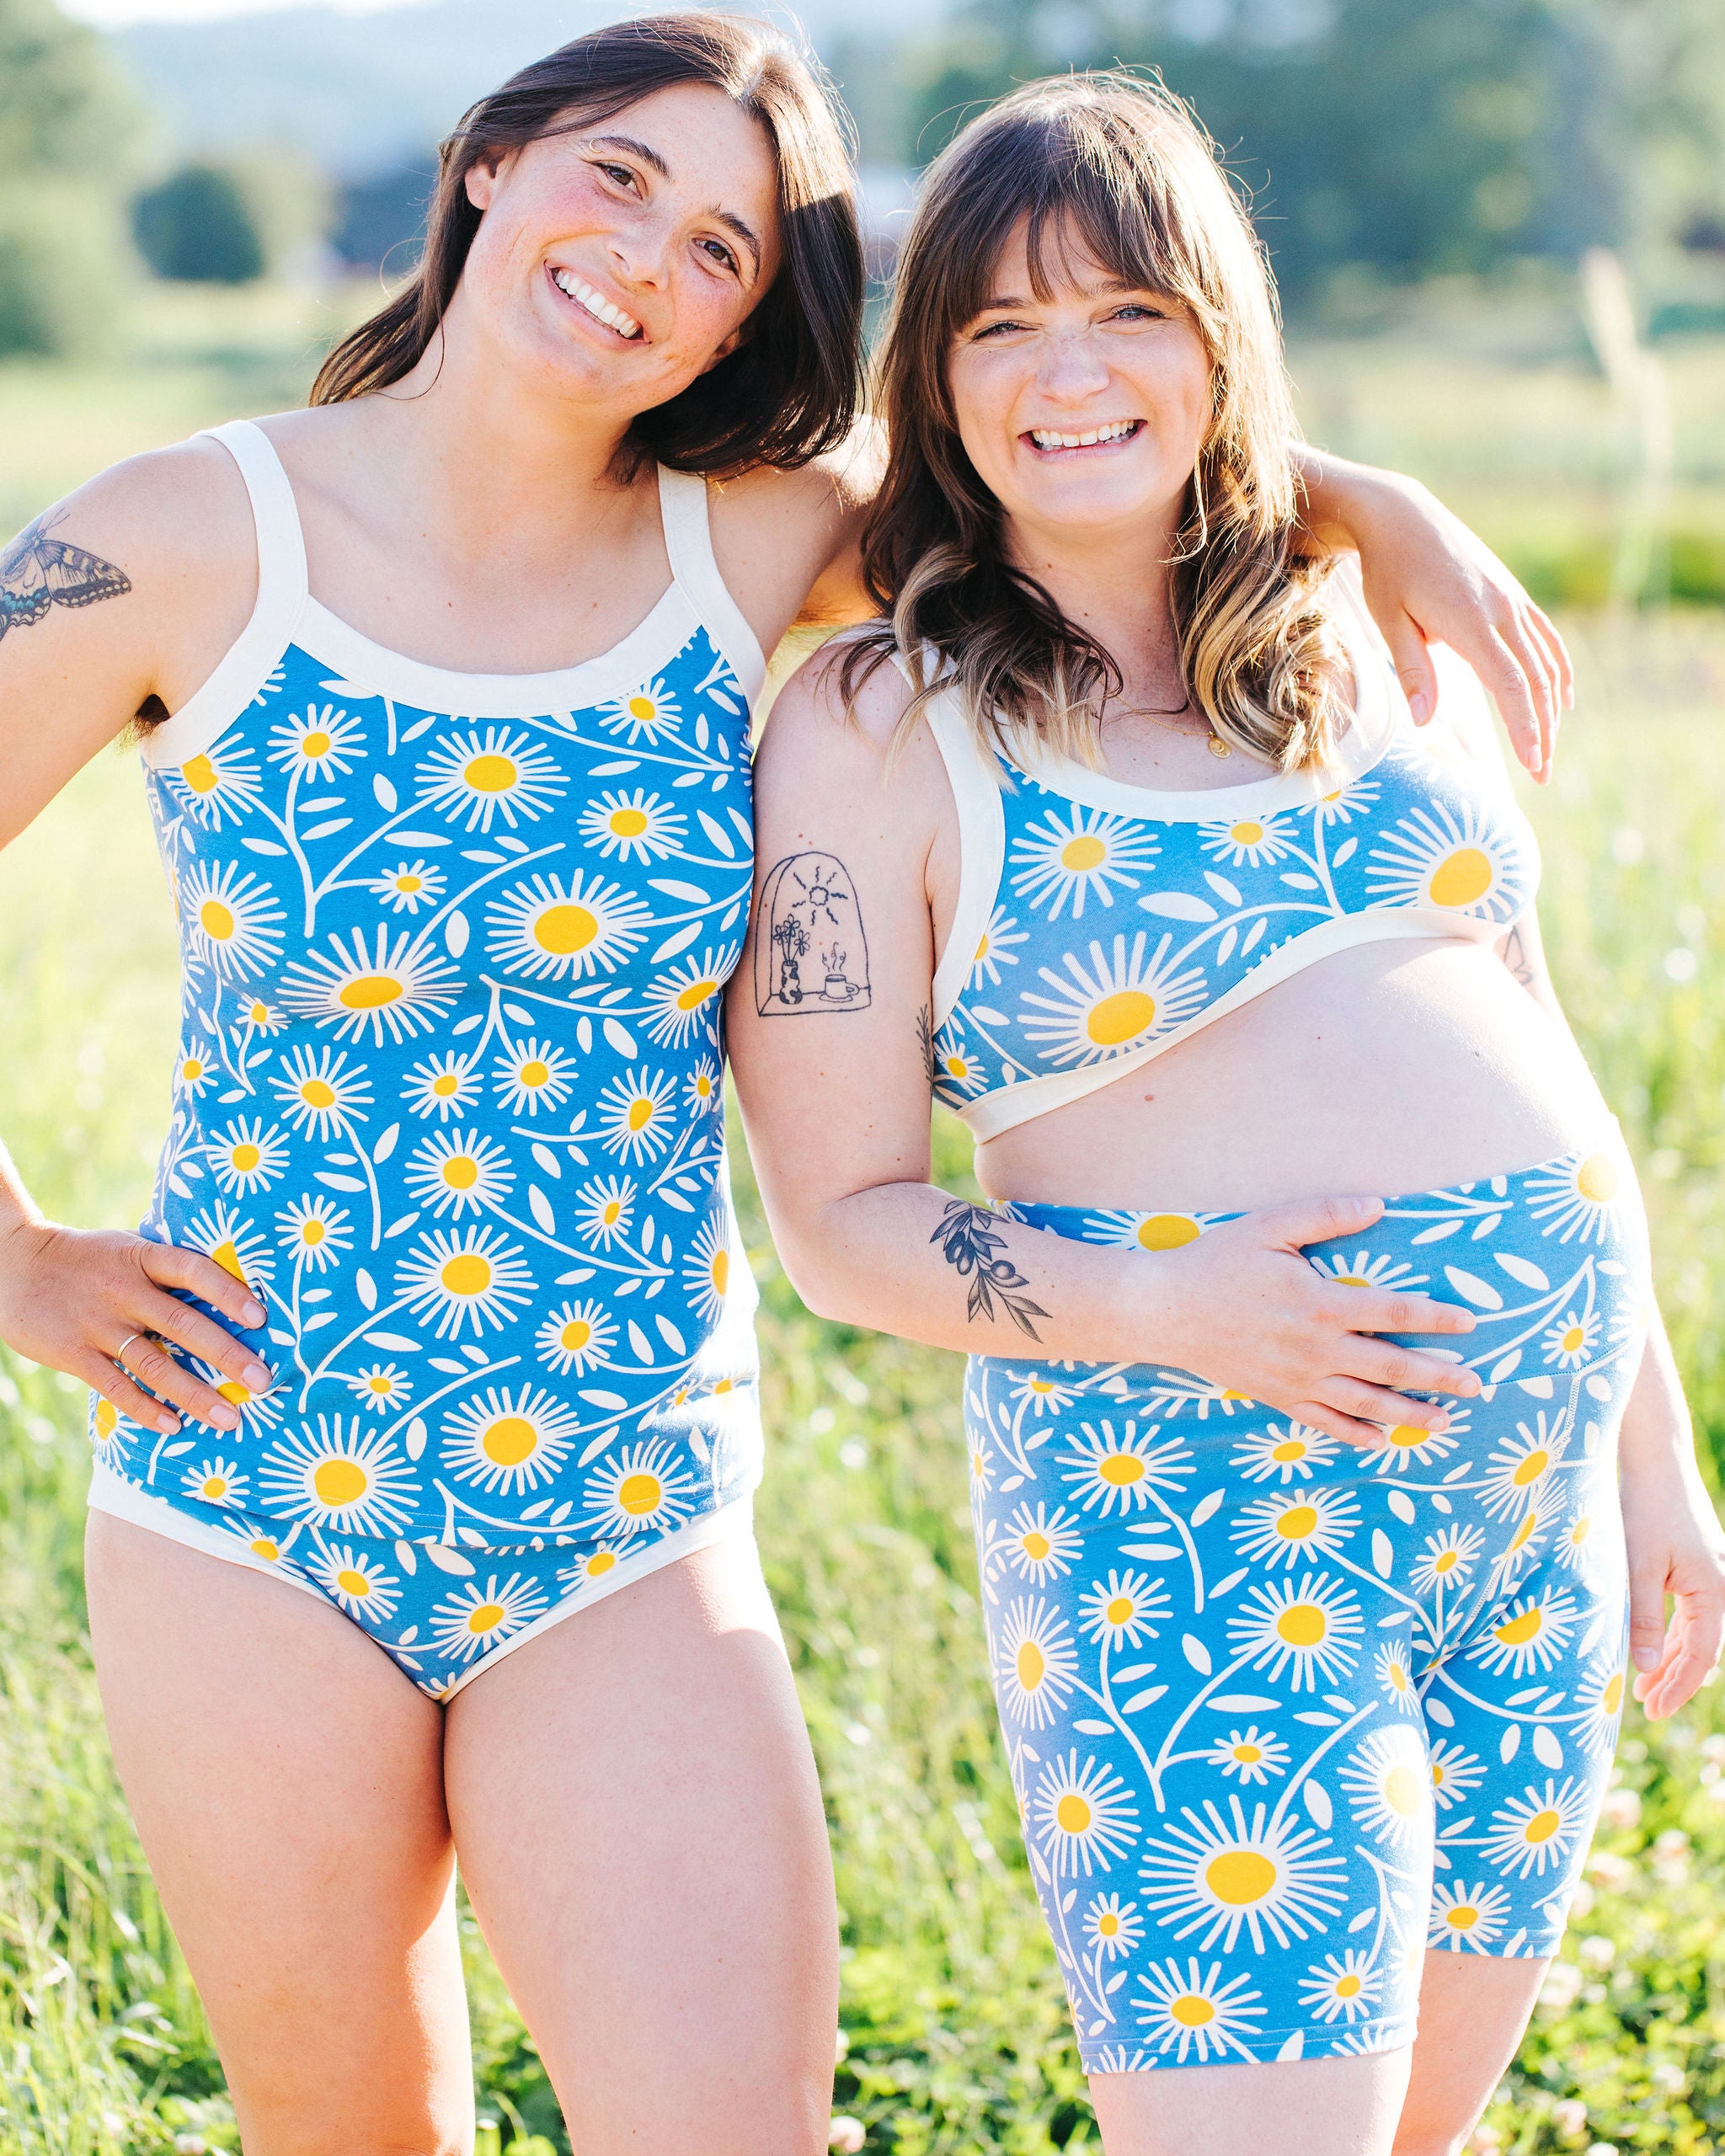 Two model smiling in a field wearing various Thunderpants styles in Daisy Days print: blue with white and yellow daisies.